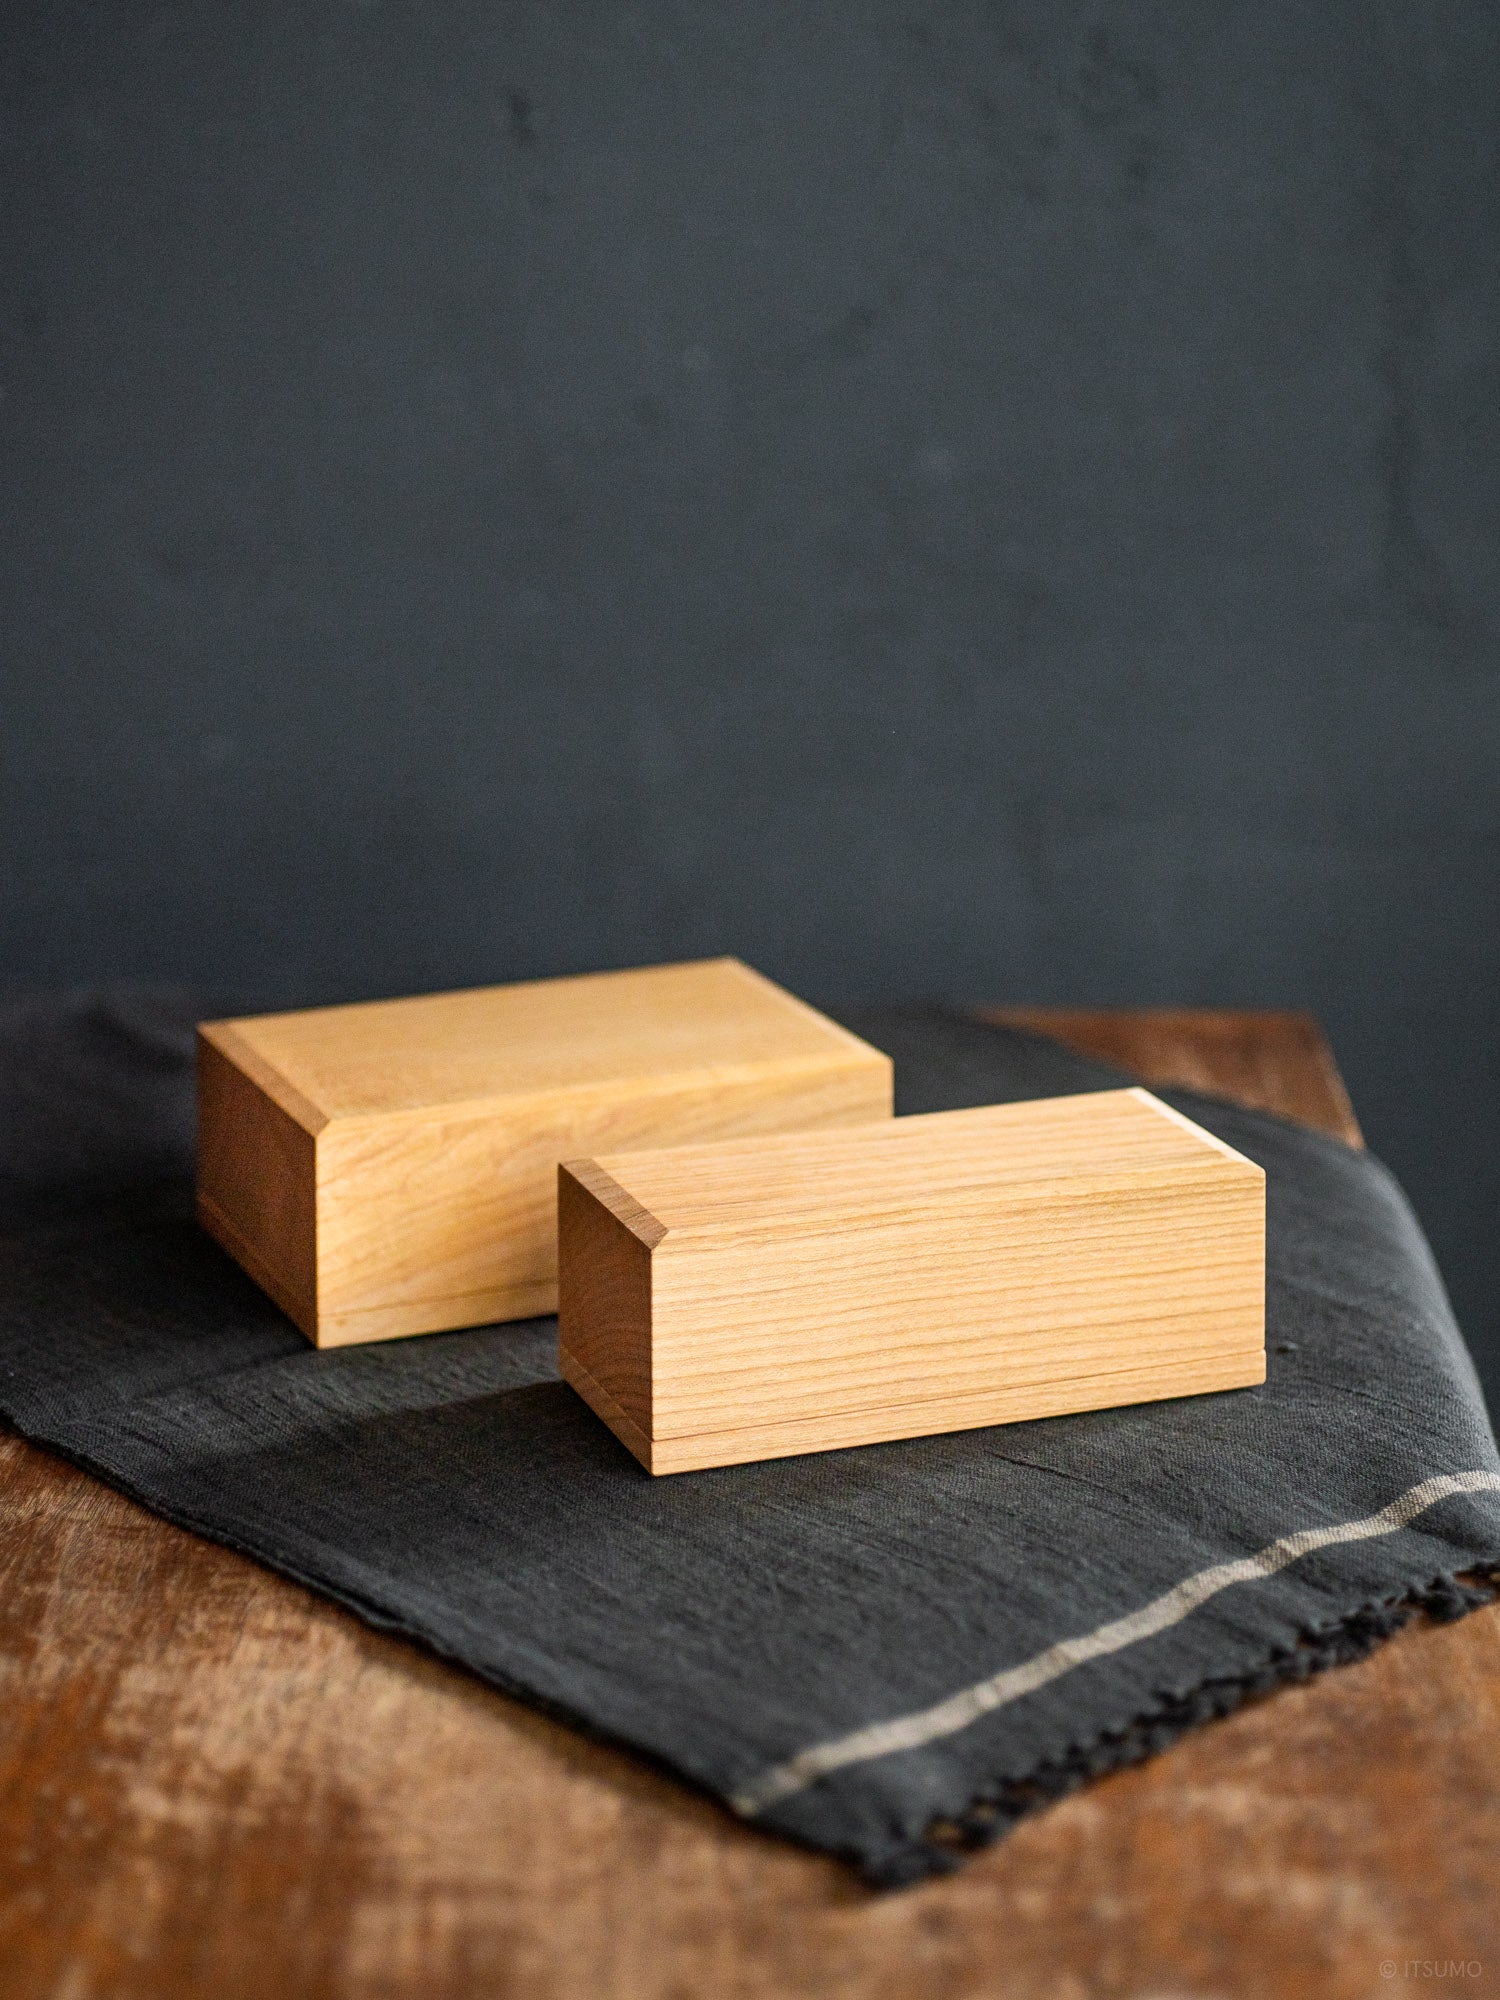 Azmaya cherry wood butter case in two sizes, half and full